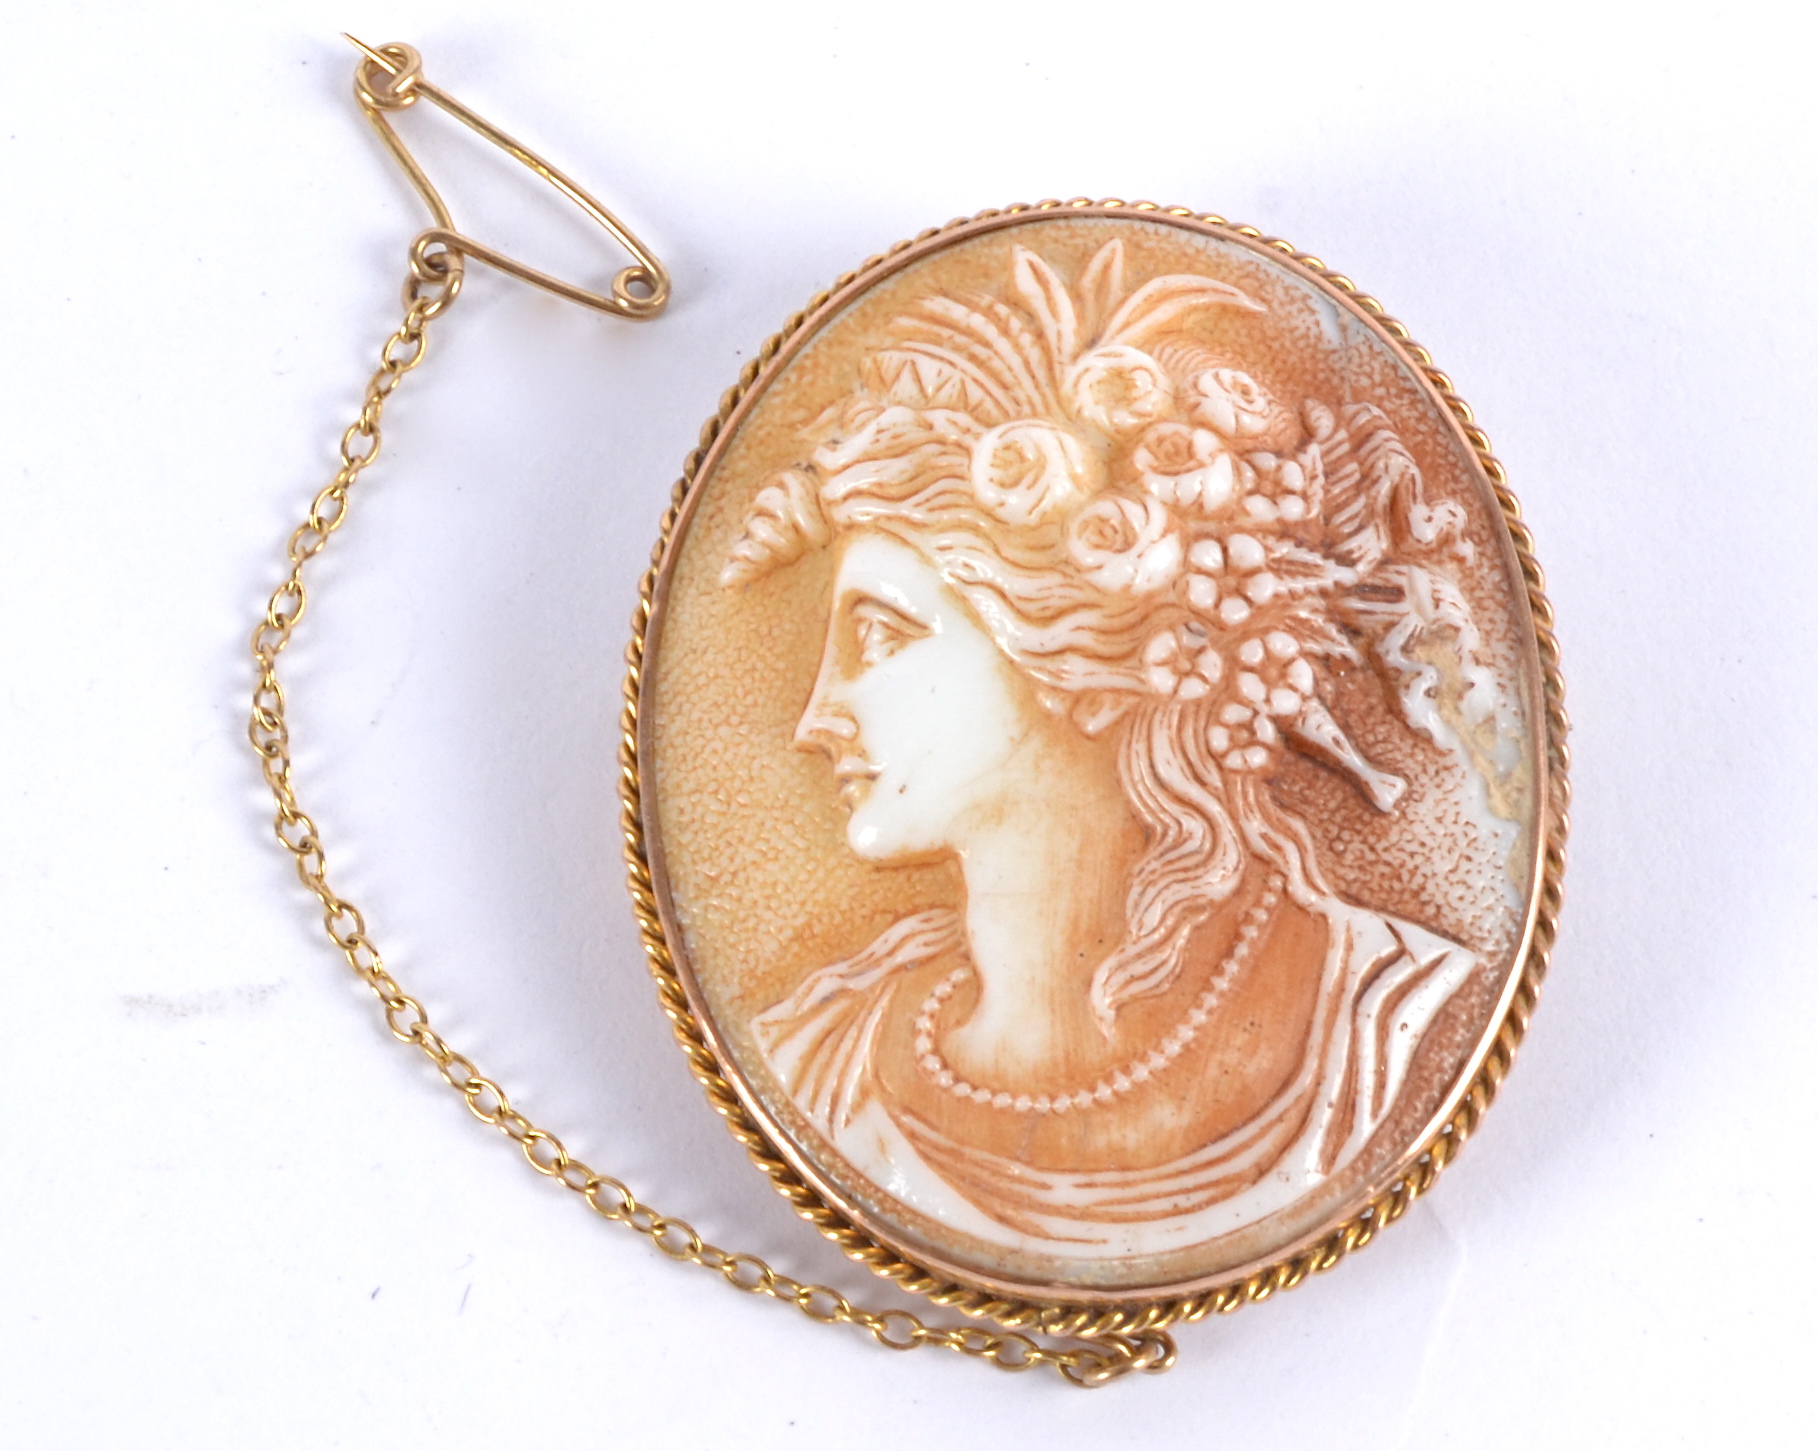 A cameo brooch featuring a woman with flowers in her hair, set in a yellow metal surround, - Image 3 of 5